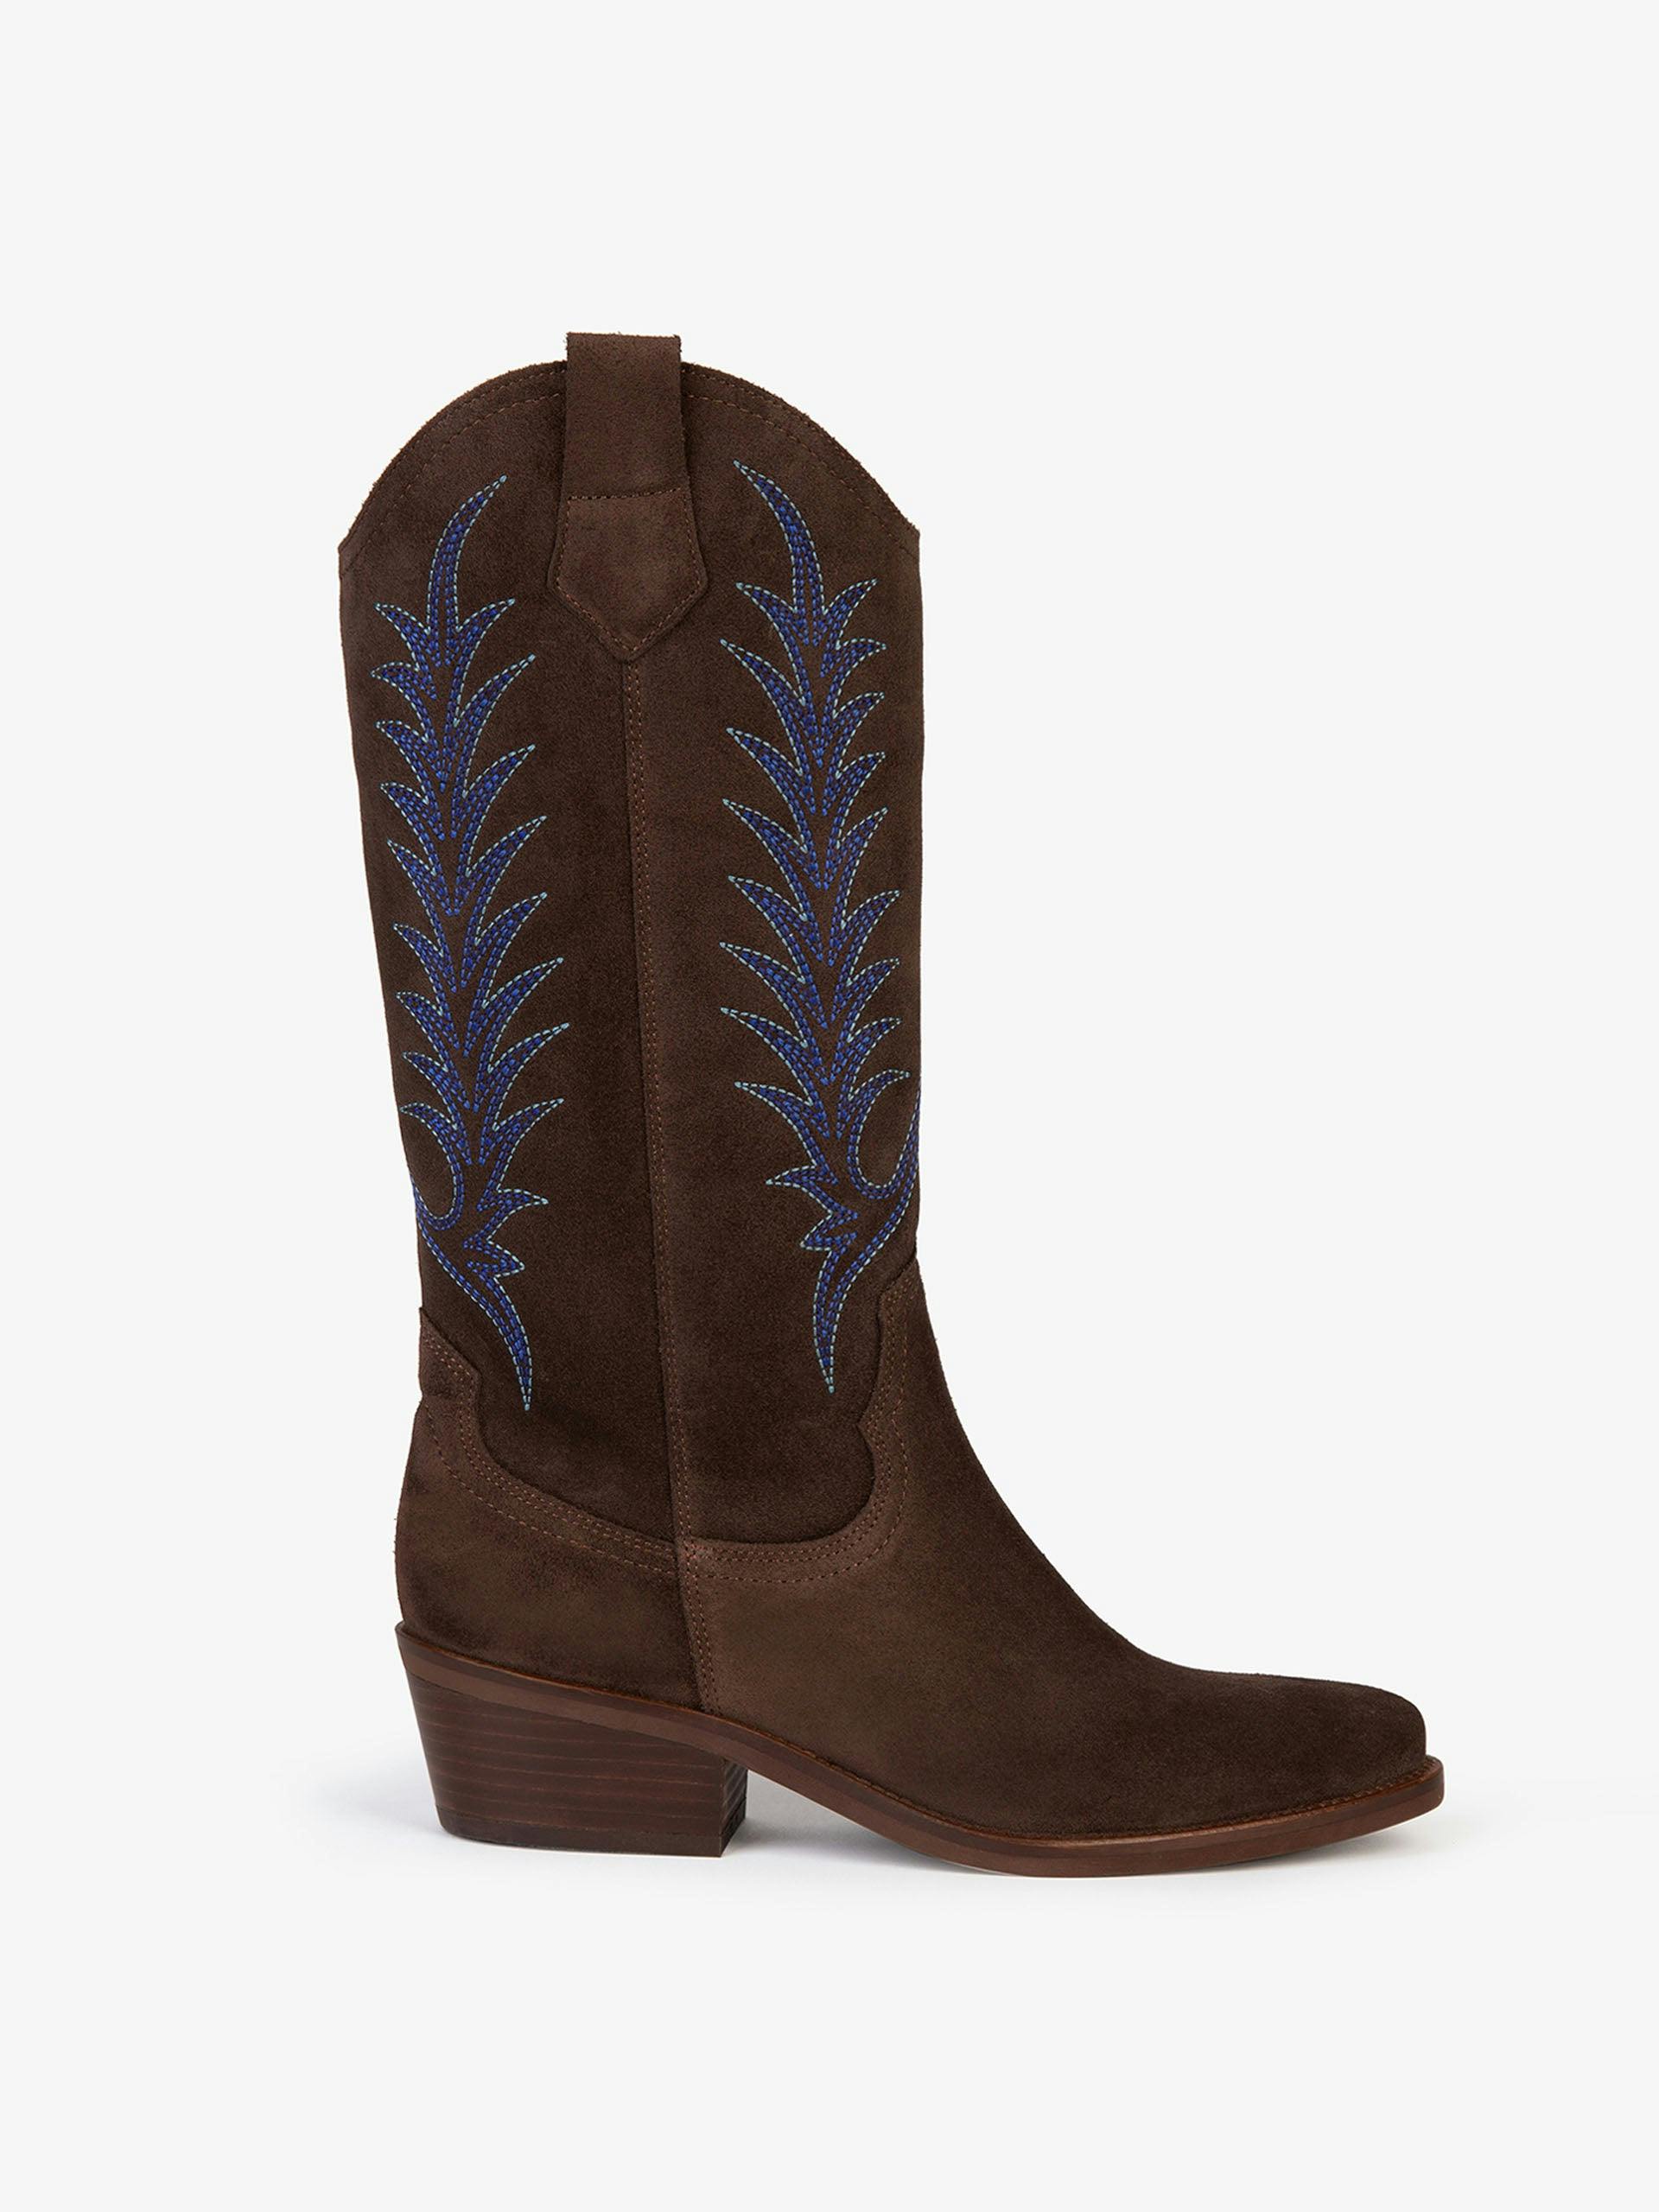 Goldie embroidered cowboy boots